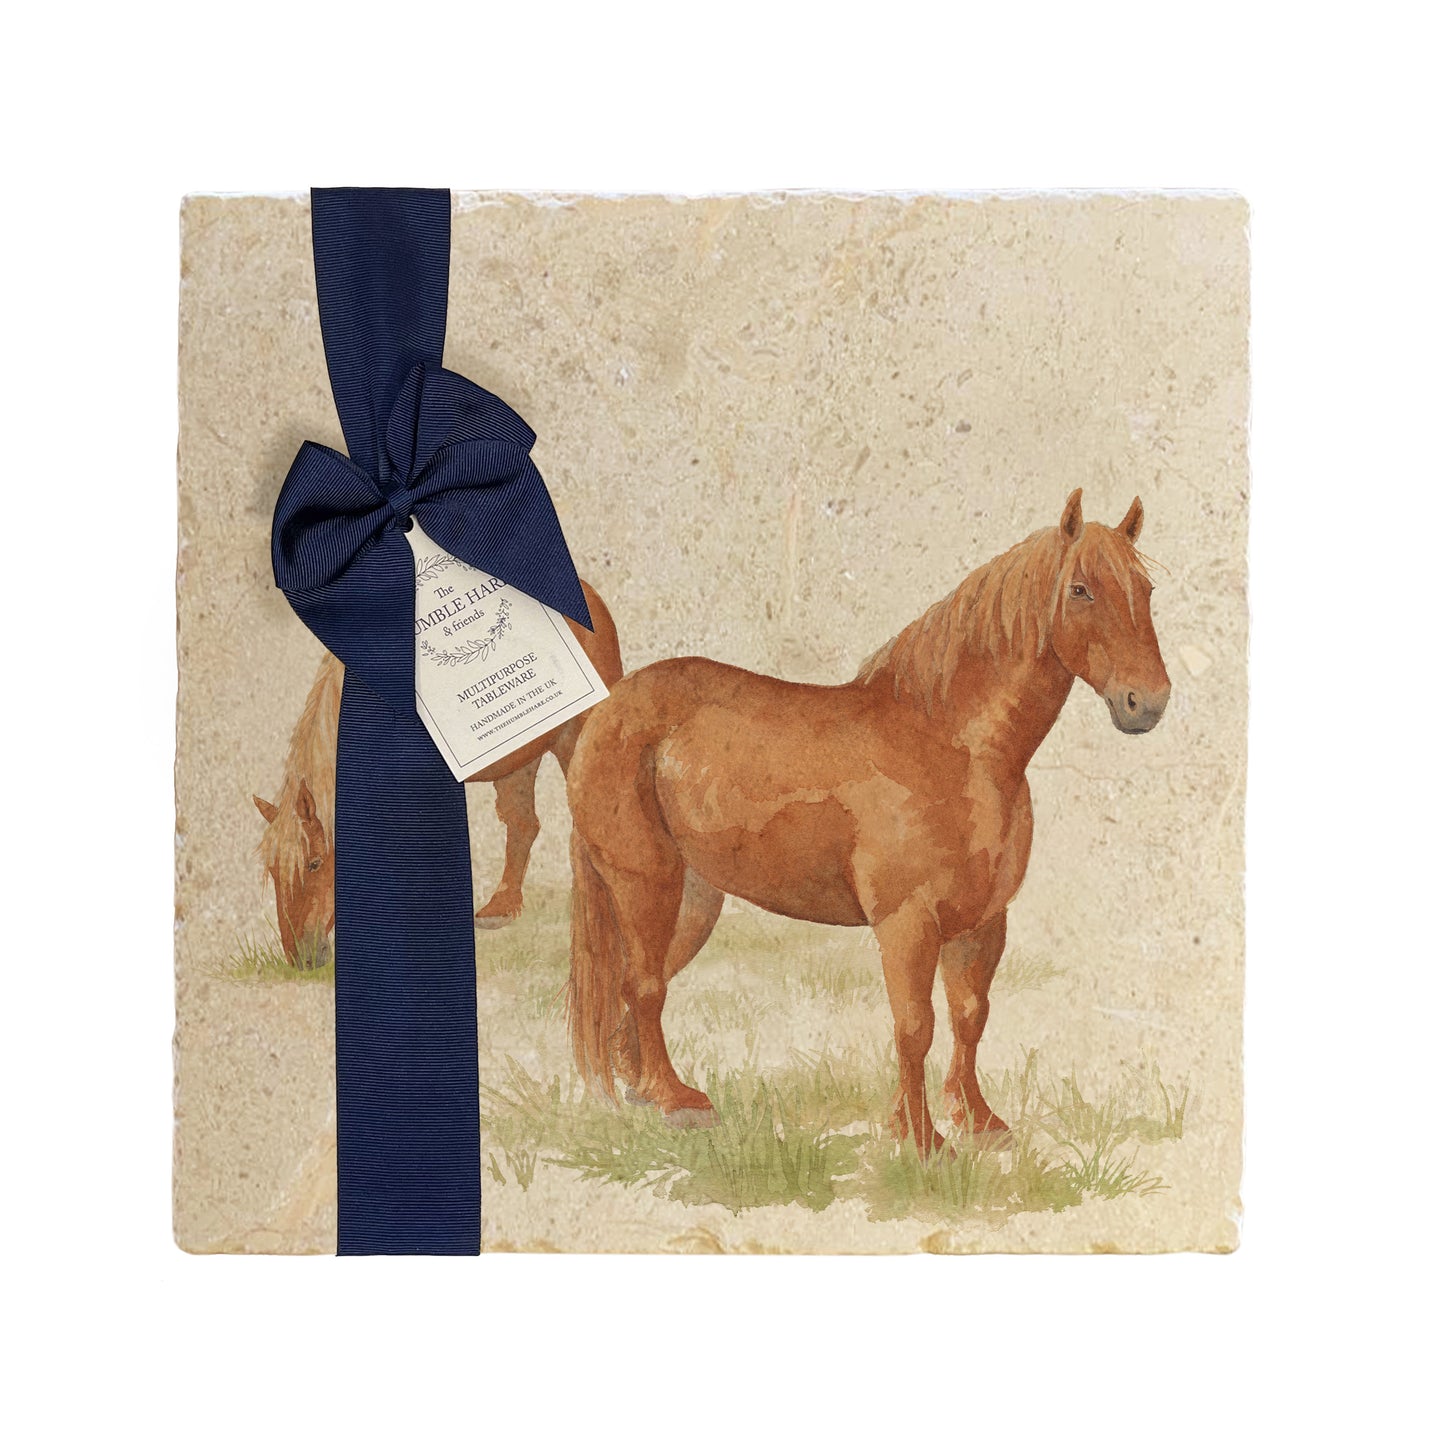 A multipurpose marble platter with a watercolour Suffolk Punch horse design, packaged with a luxurious dark blue bow and branded gift tag.